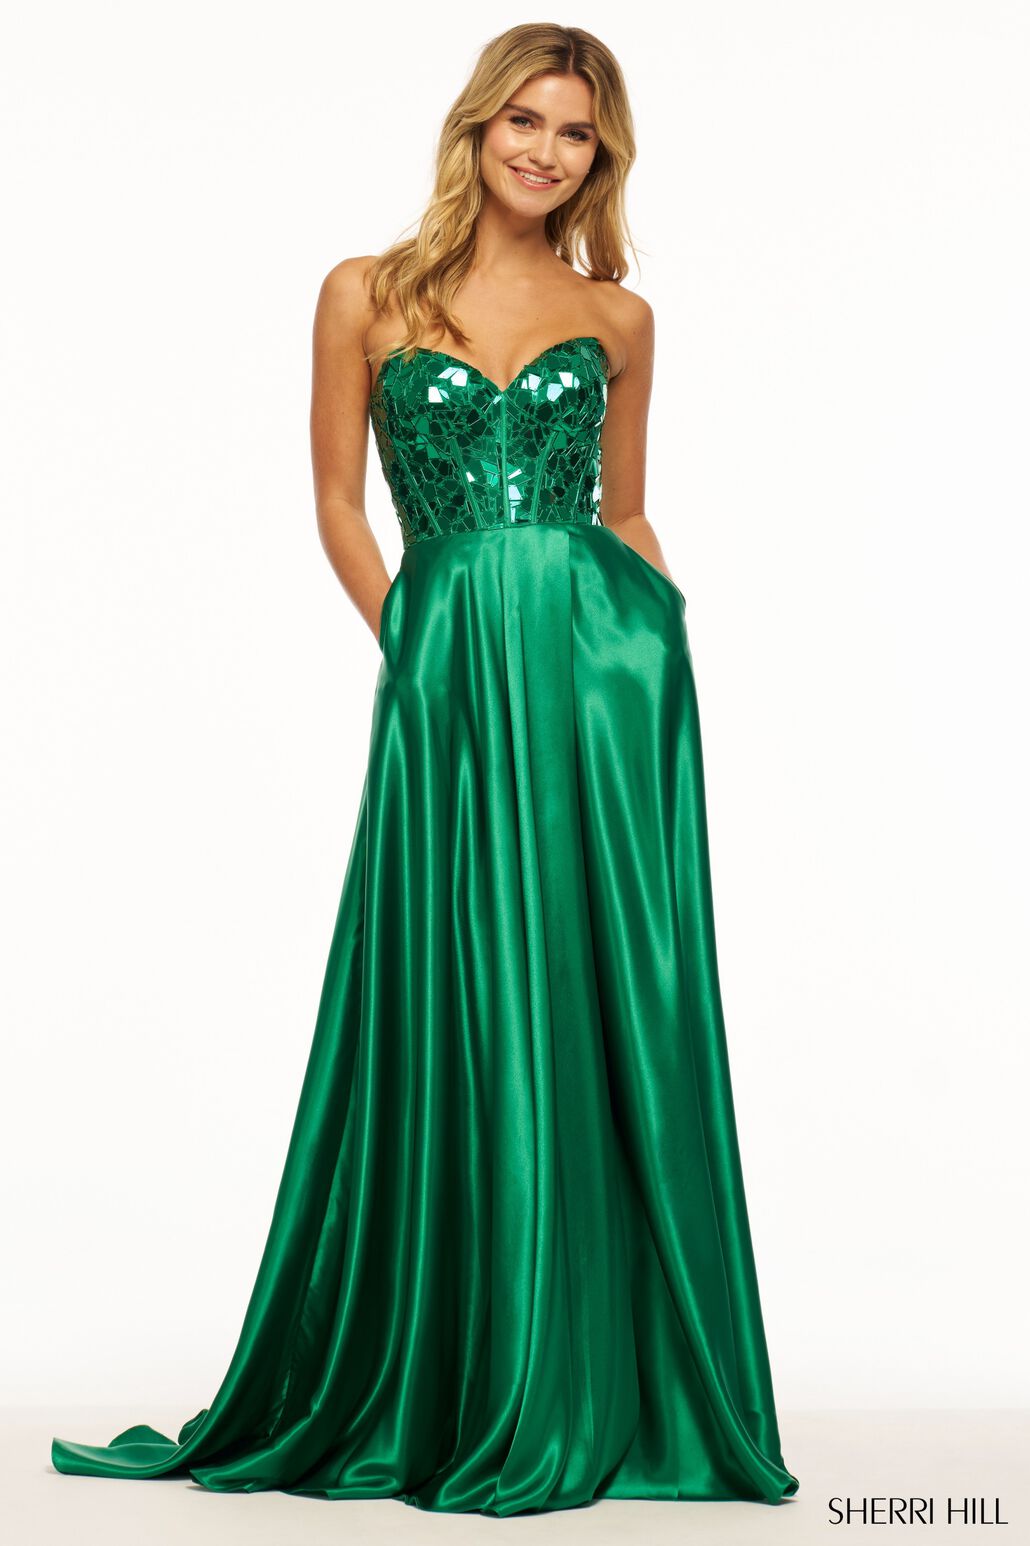 Sherri Hill 56041 Strapless Charmeuse Gown with Cut Glass Corset Bodice - A stunning strapless gown featuring a cut glass corset bodice, sweetheart neckline, and high skirt slit. Perfect for making a statement at prom.  The model is wearing the dress in the color emerald.